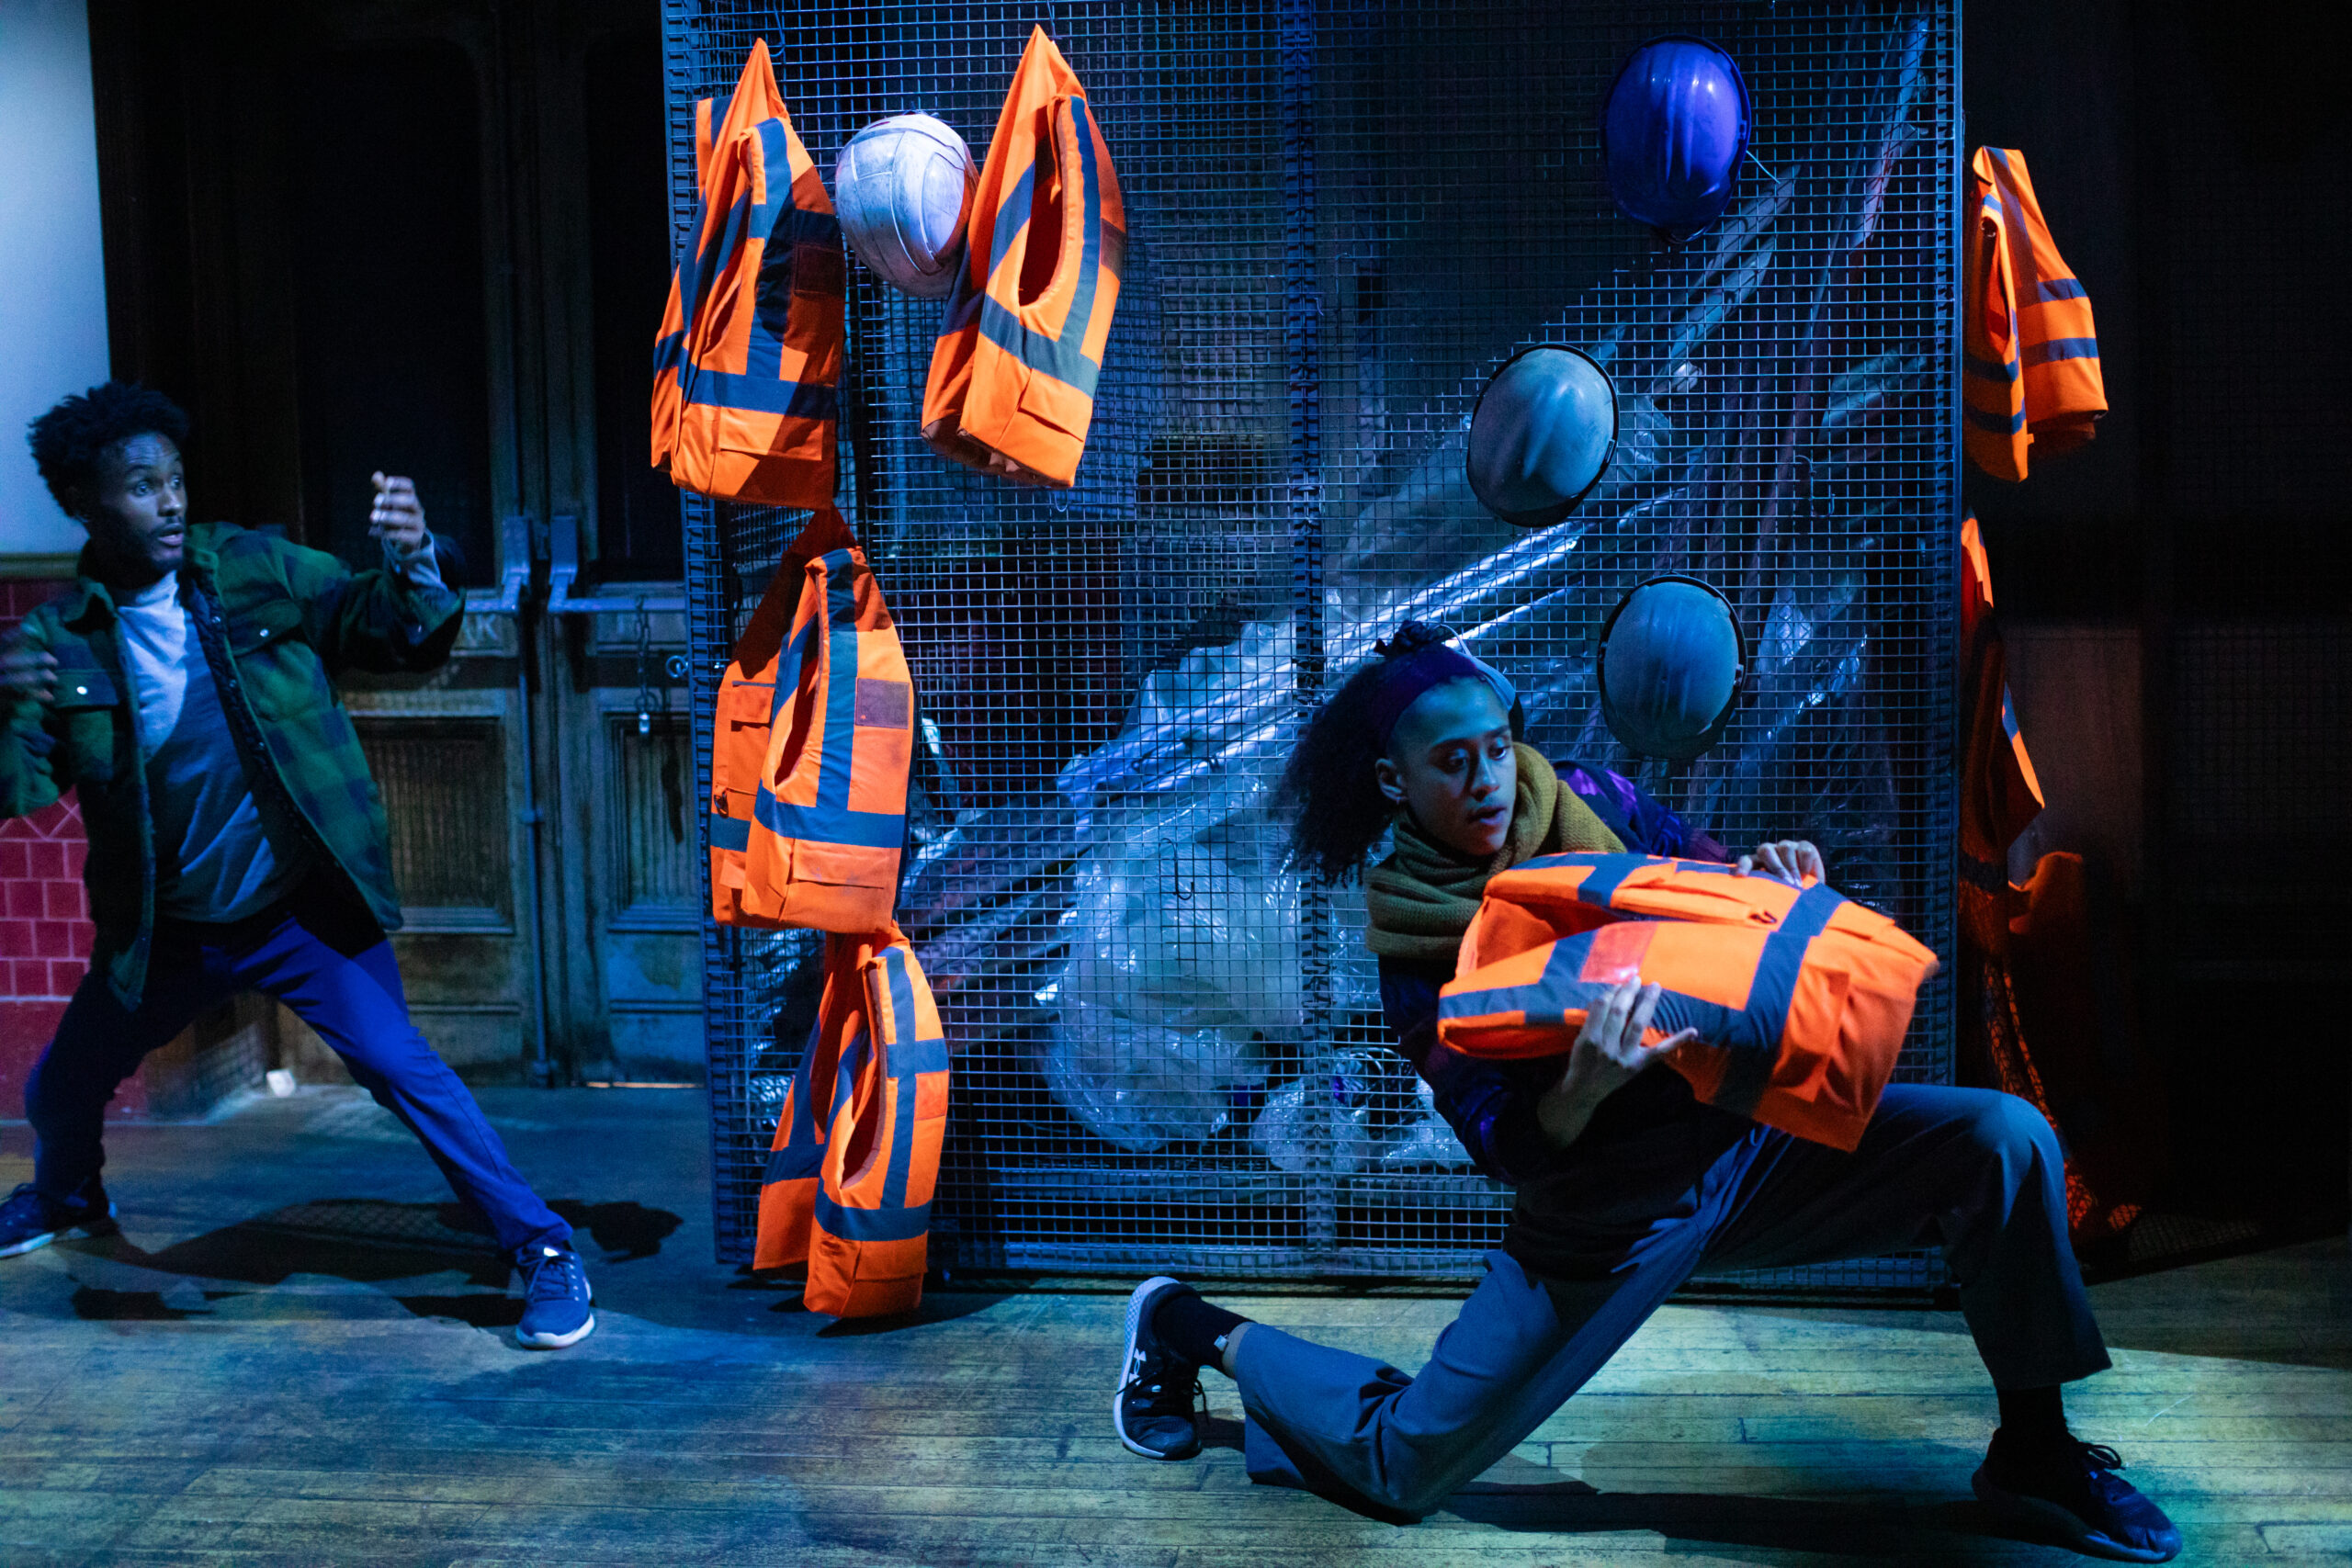 A closed cage in the background full of plastic. Hanging on the outside of the cage are hardhats and orange lifejackets. At the front of the image, a dancer is kneeling down and moving backwards holding one of the lifejackets. Behind her is another performer with arms at stretched, ready to catch a lifejacket, gently moving backwards.